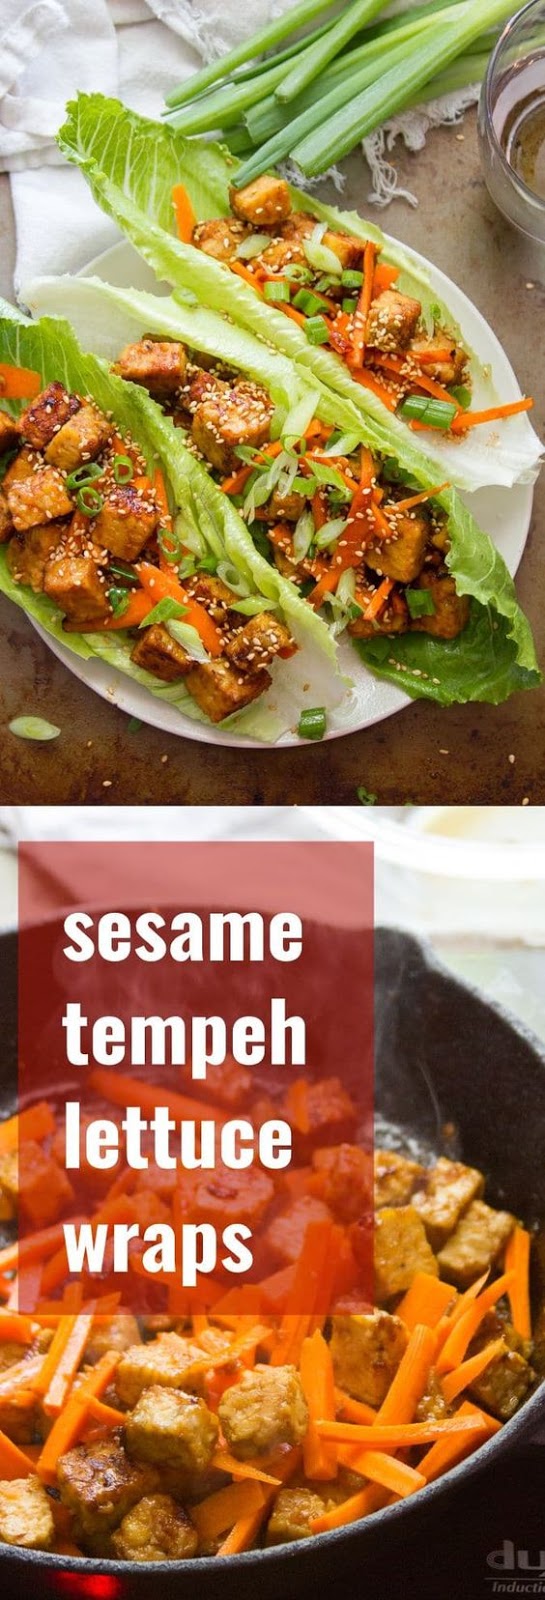 Crunchy romaine leaves are stuffed with pan-fried tempeh cubes in a savory sesame ginger sauce to make these healthy Asian-inspired vegan lettuce wraps. #vegan #veganfood #veganrecipes #vegetarian #vegetarianrecipes #meatlessmonday #tempeh #healthyrecipes #glutenfree